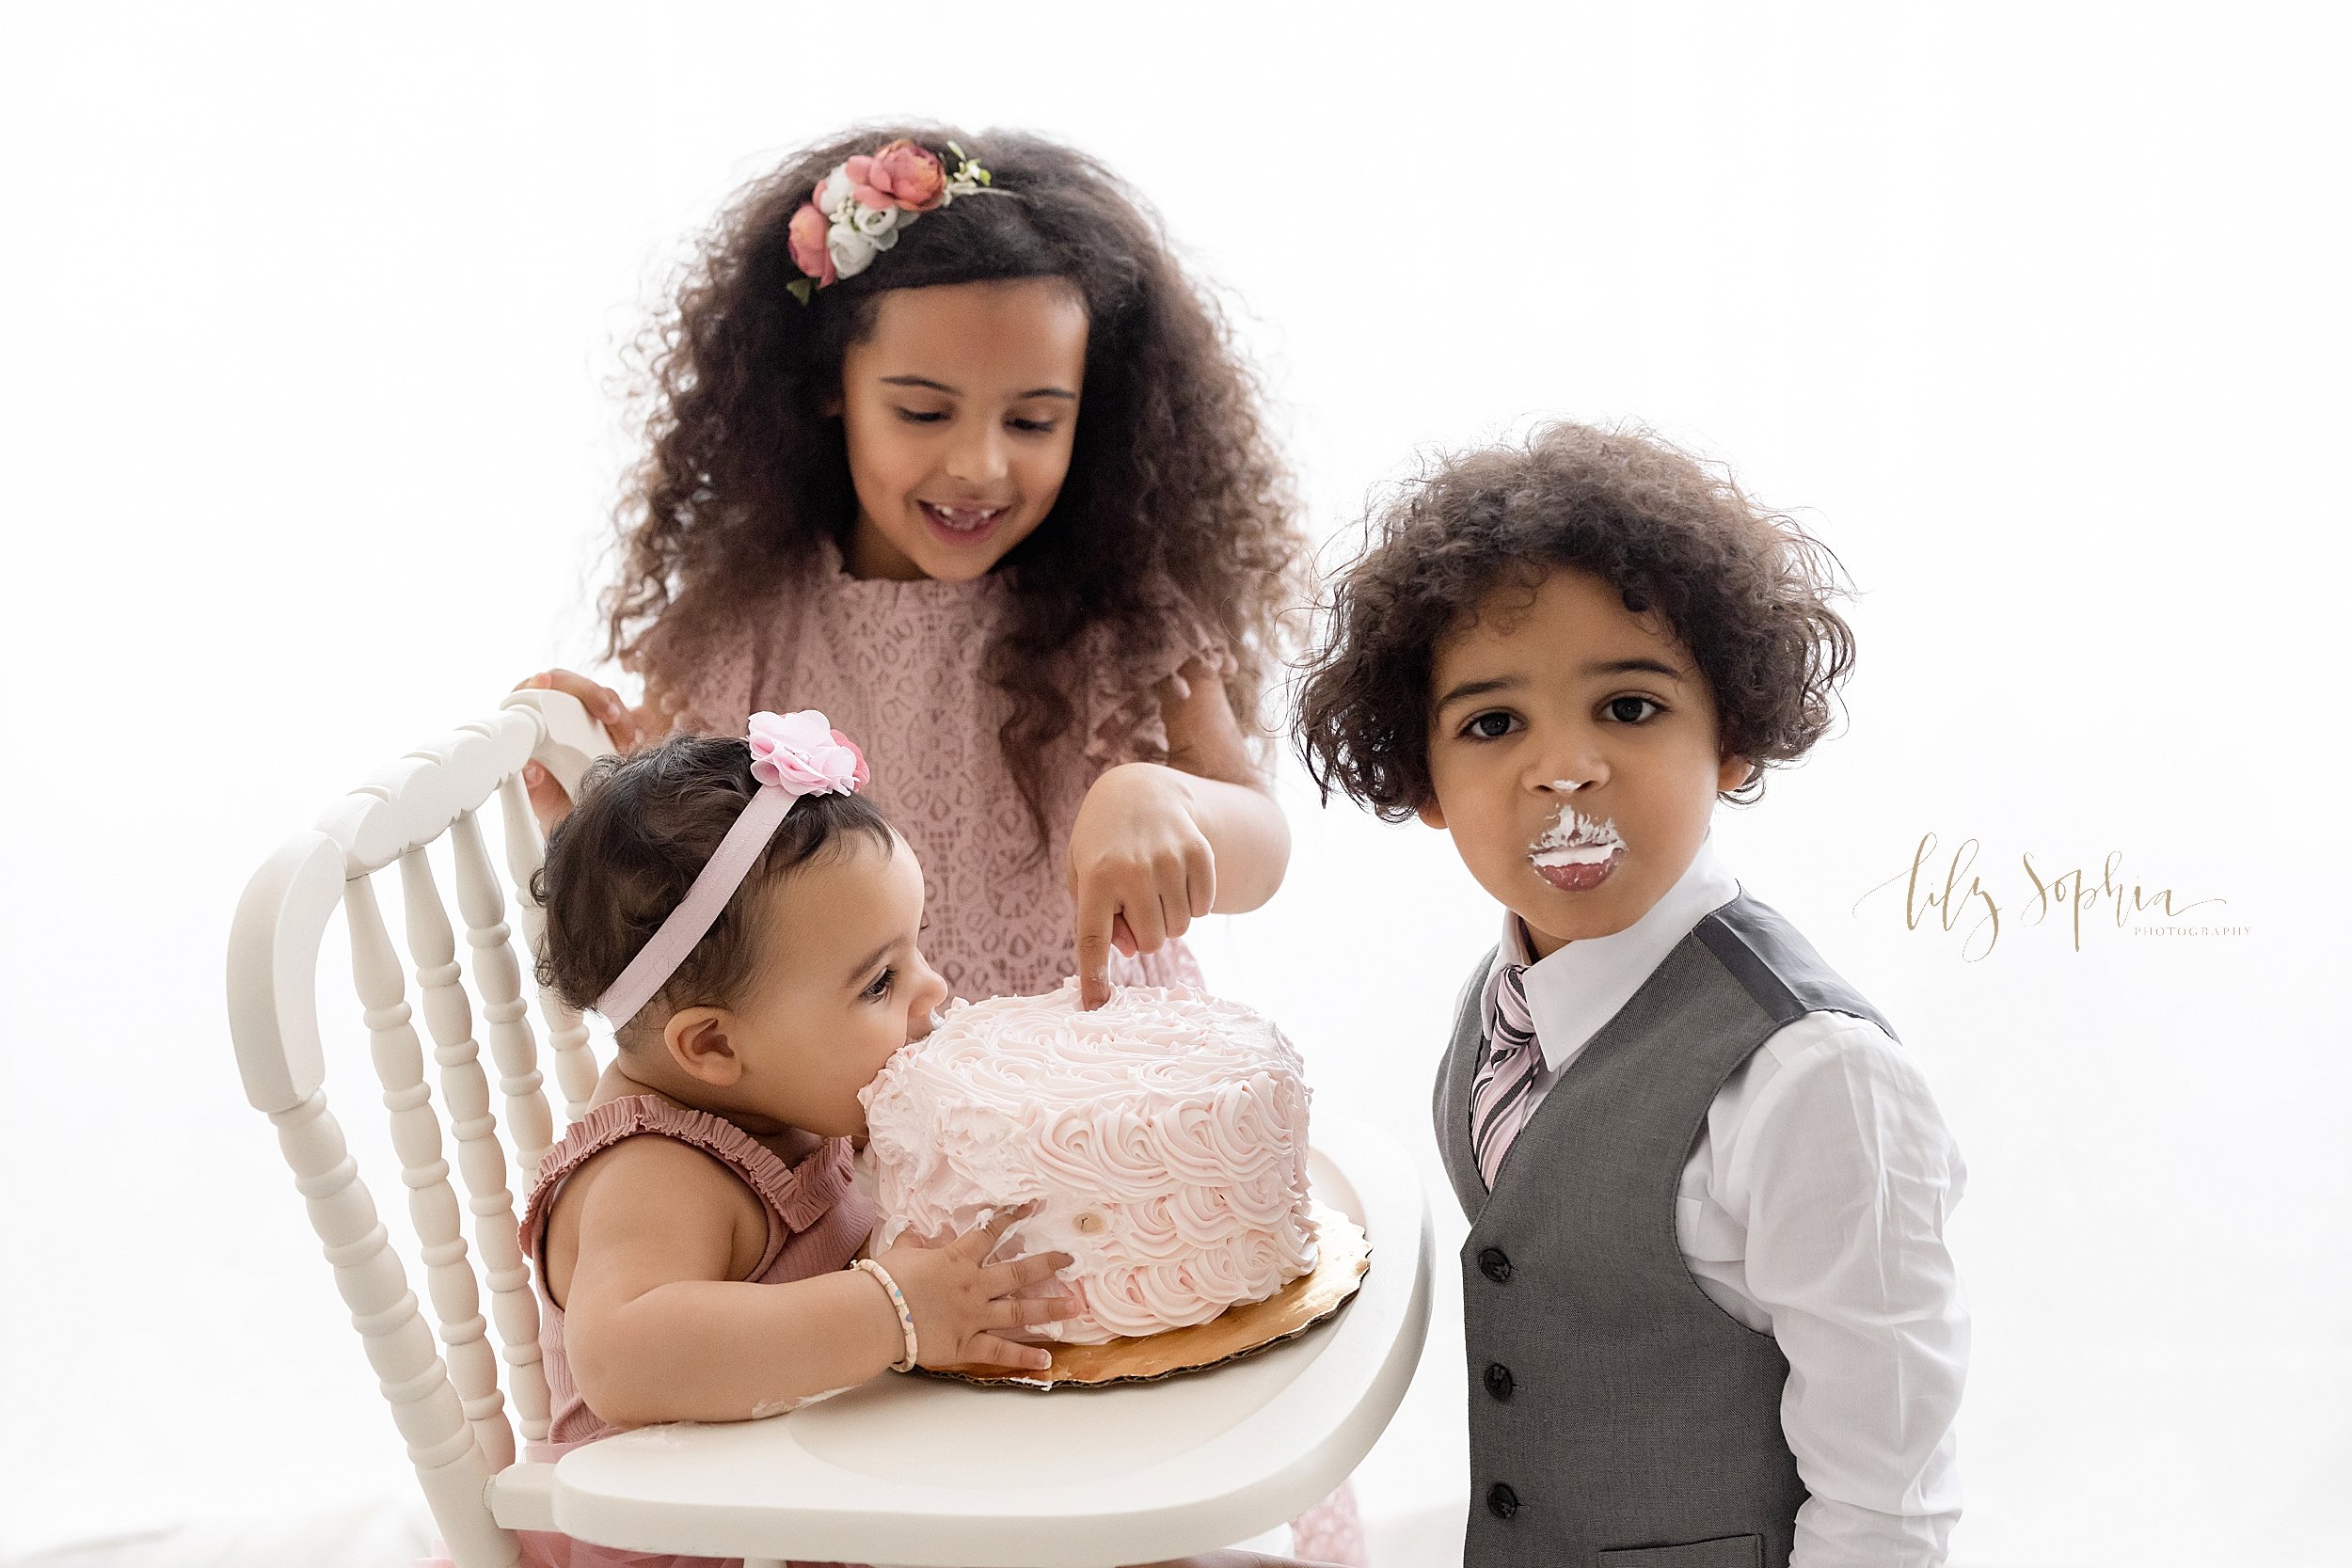  Smash cake first birthday family photo of a one year old baby girl sitting in an antique highchair holding her cake and taking a bite while her older sister stands next to her and put her finger into the frosting and her brother faces her while look